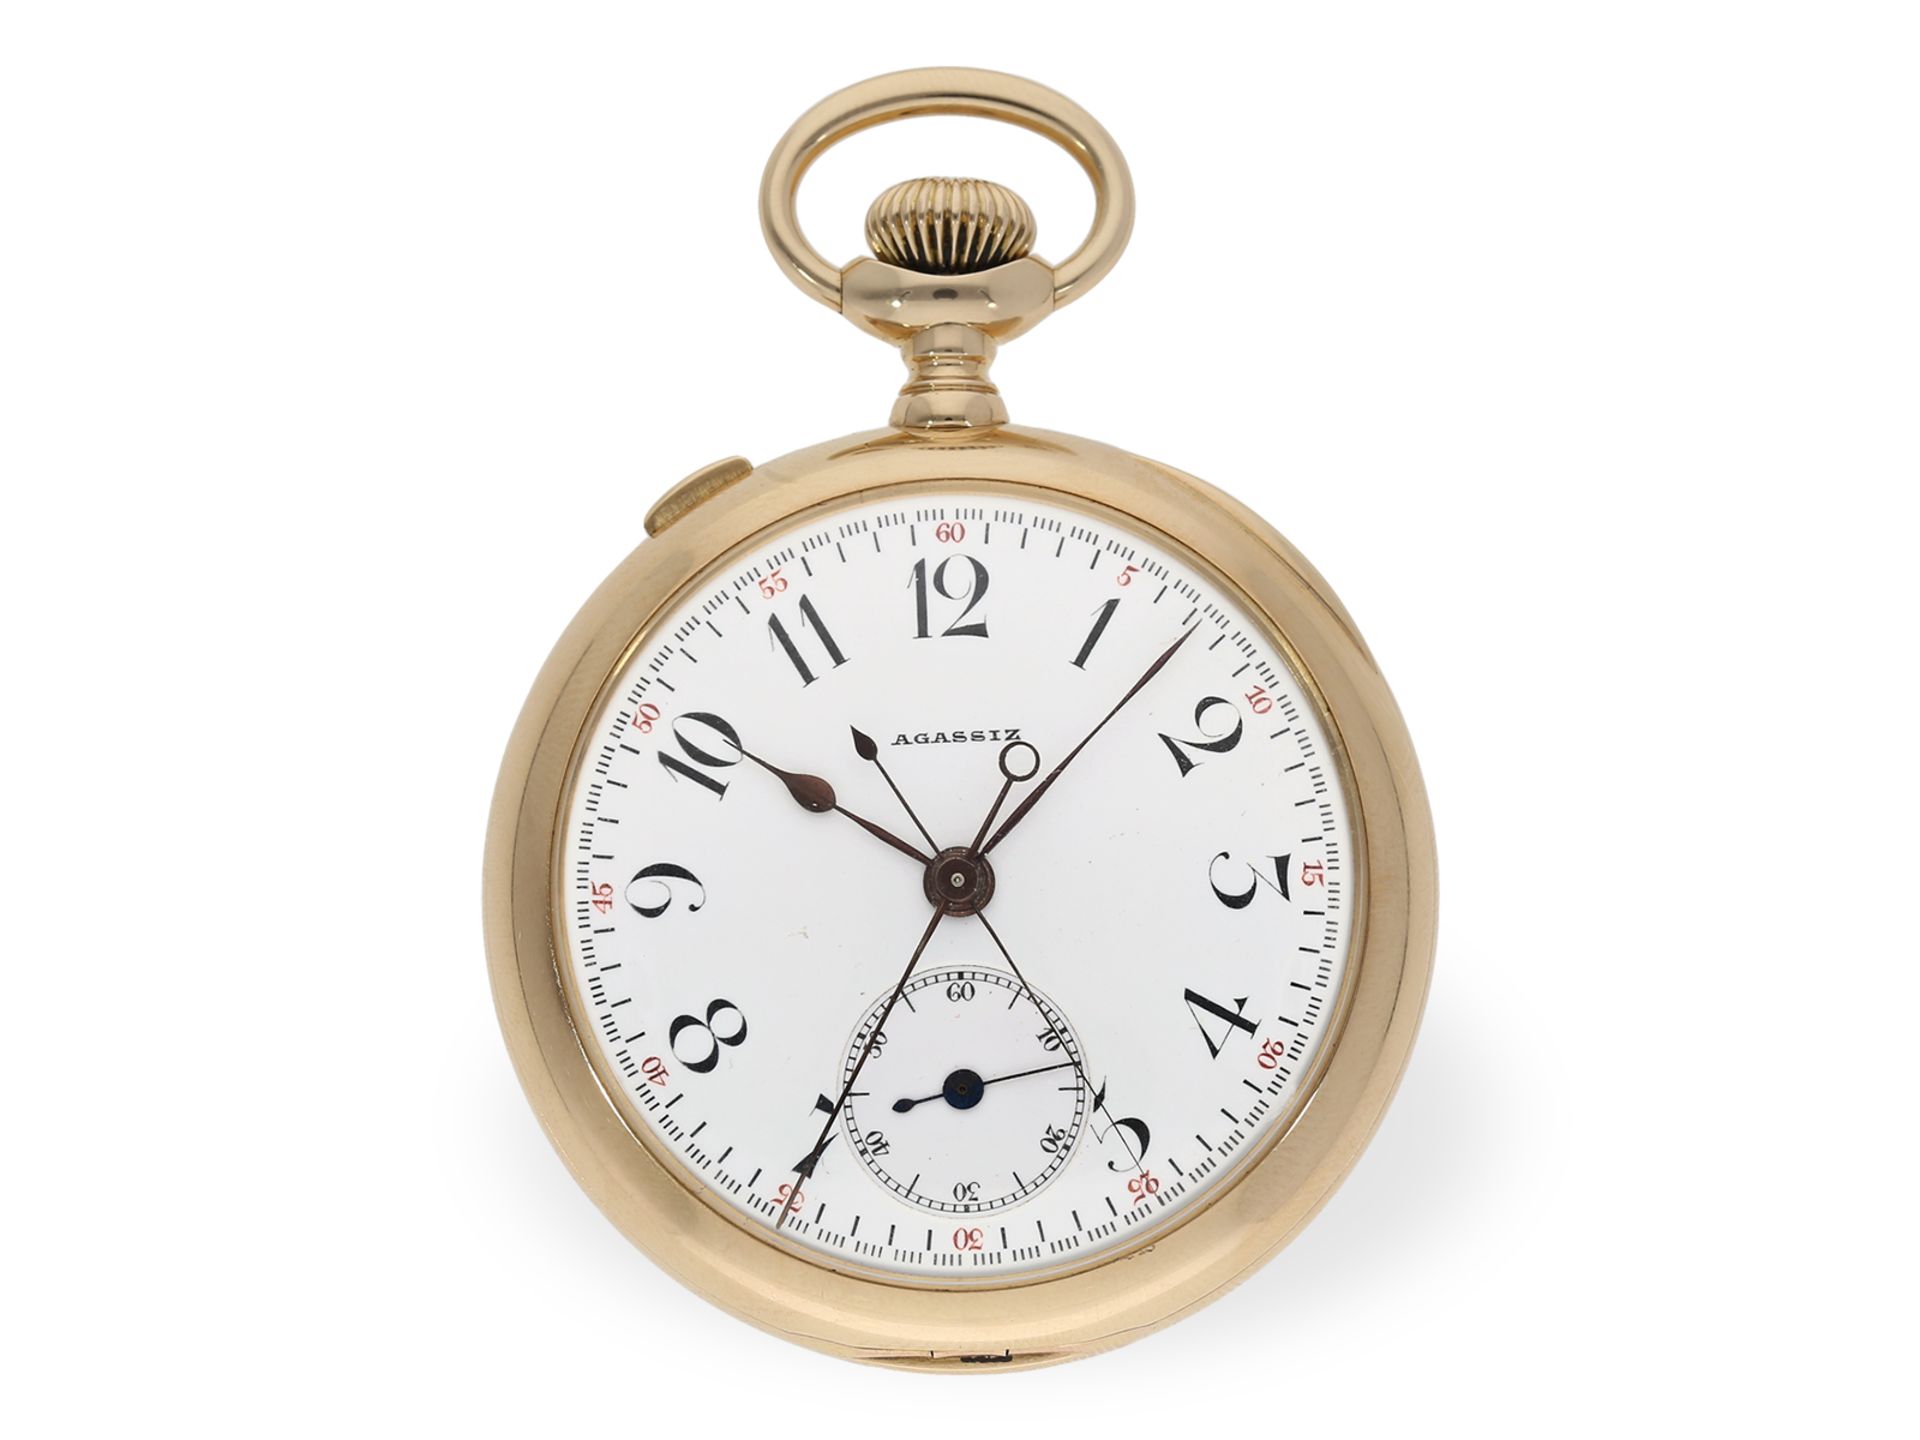 Pocket watch: quality chronograph rattrapante in very beautiful condition, Agassiz ca. 1910